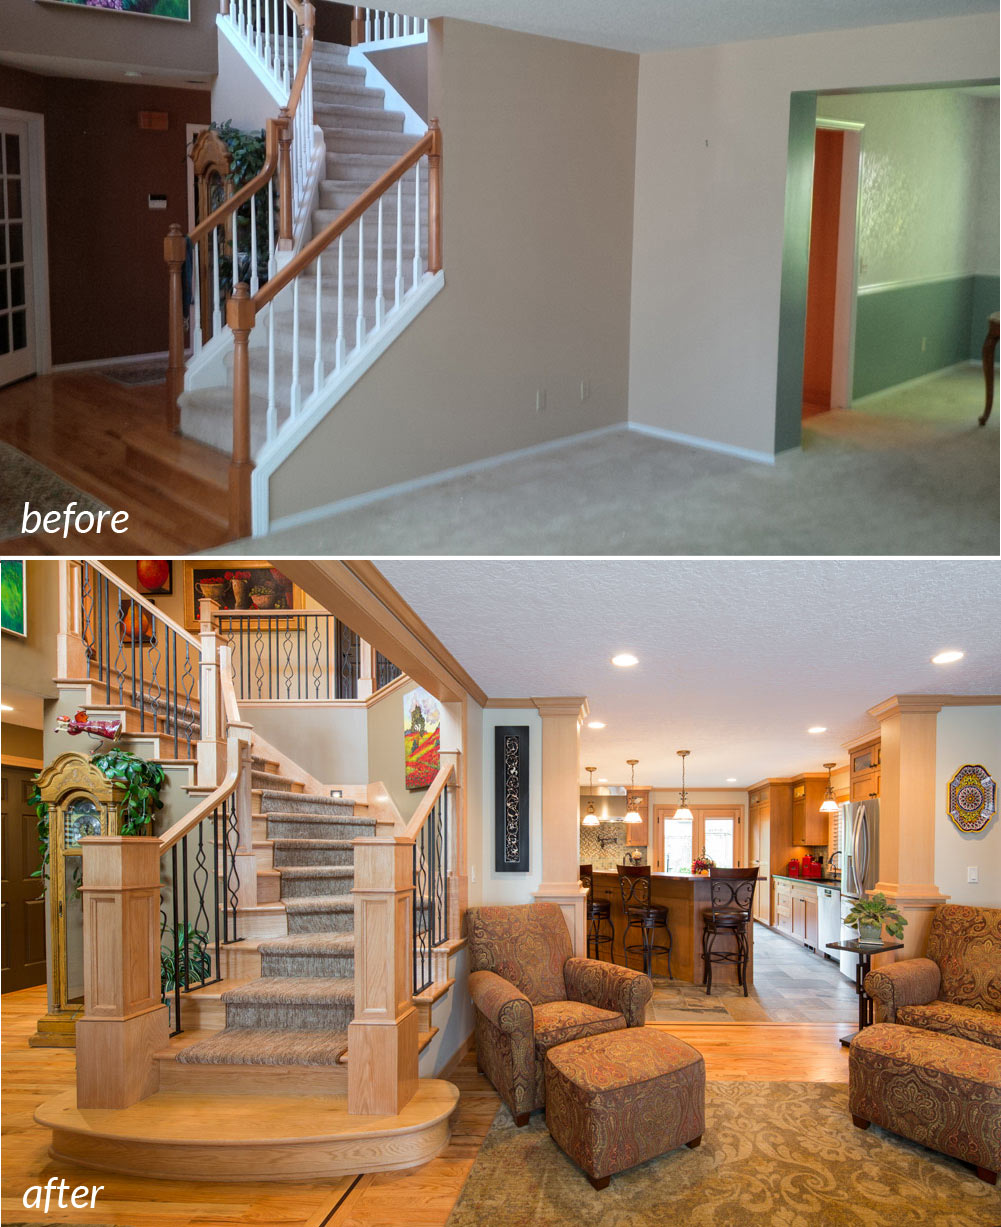 Traditional Home Before & After Remodel | Hammer & Hand